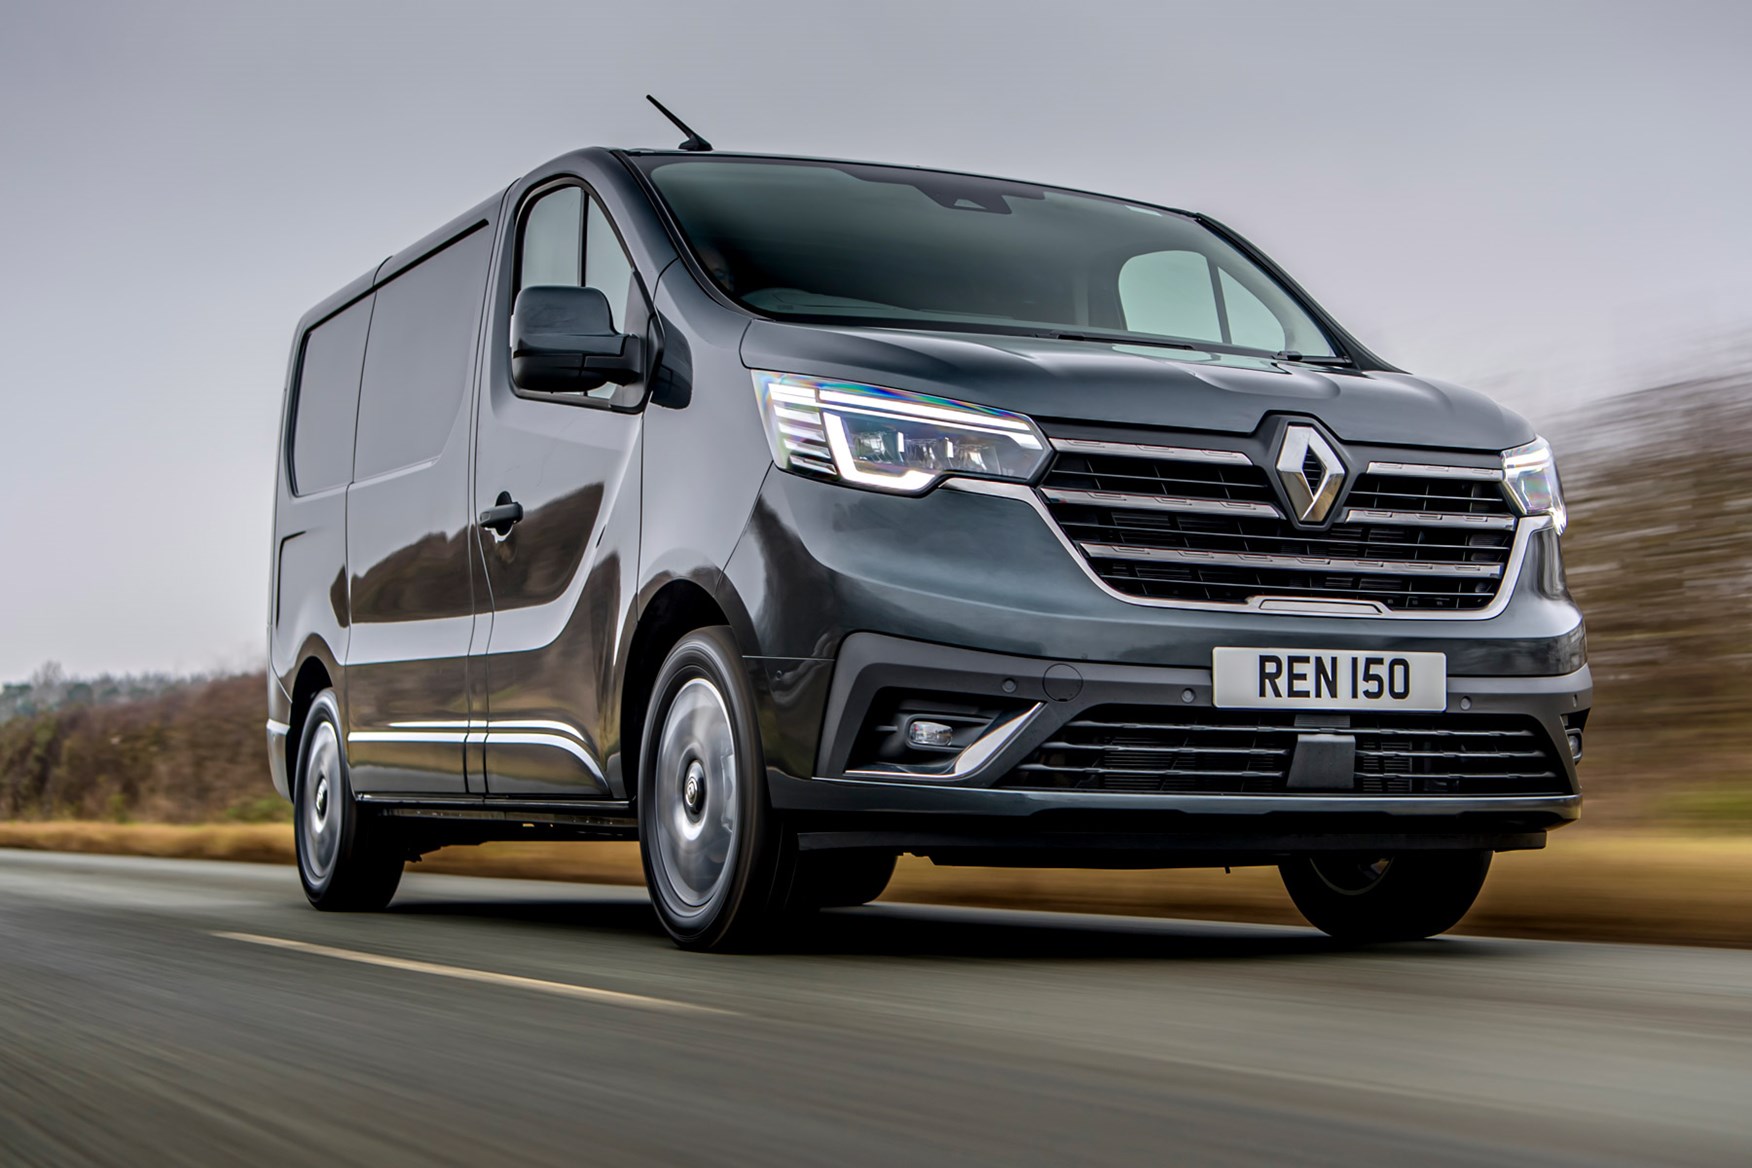 Renault Trafic van review - 2022 facelift model, front, driving, low